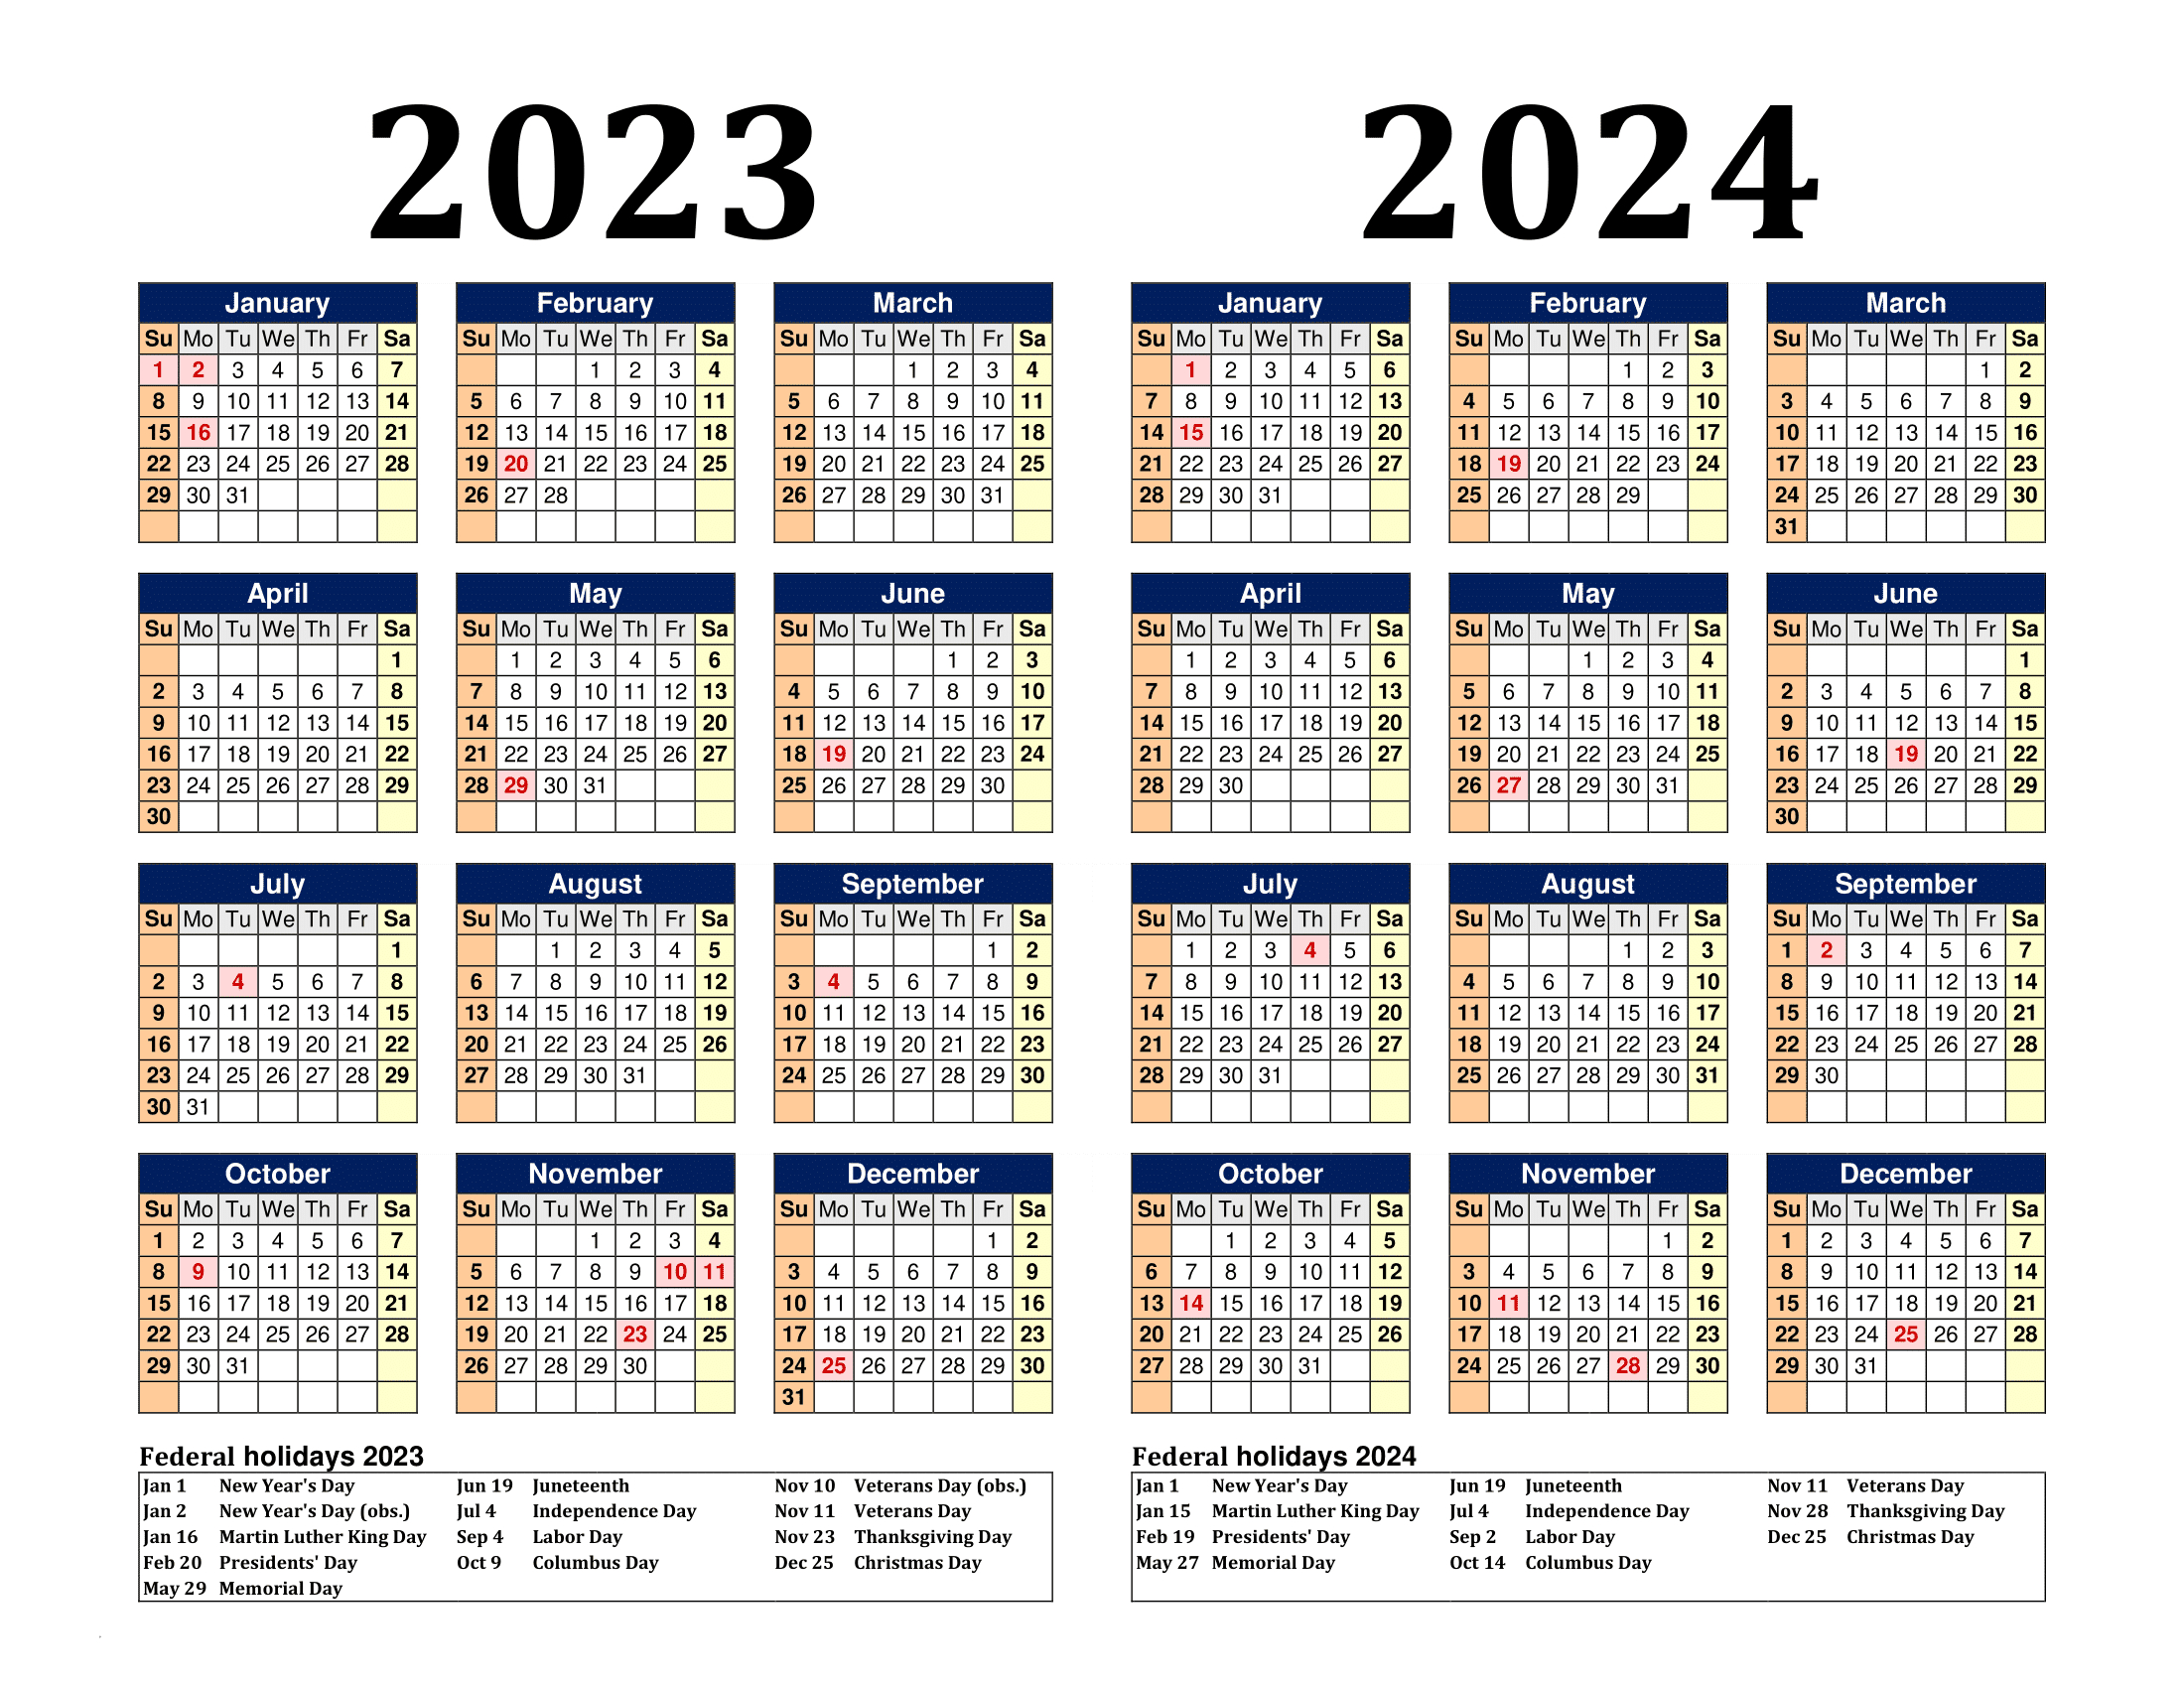 Free Printable Two Year Calendar Templates For 2023 And 2024 In Pdf | Free Printable Calendar 2023 2024 Editable